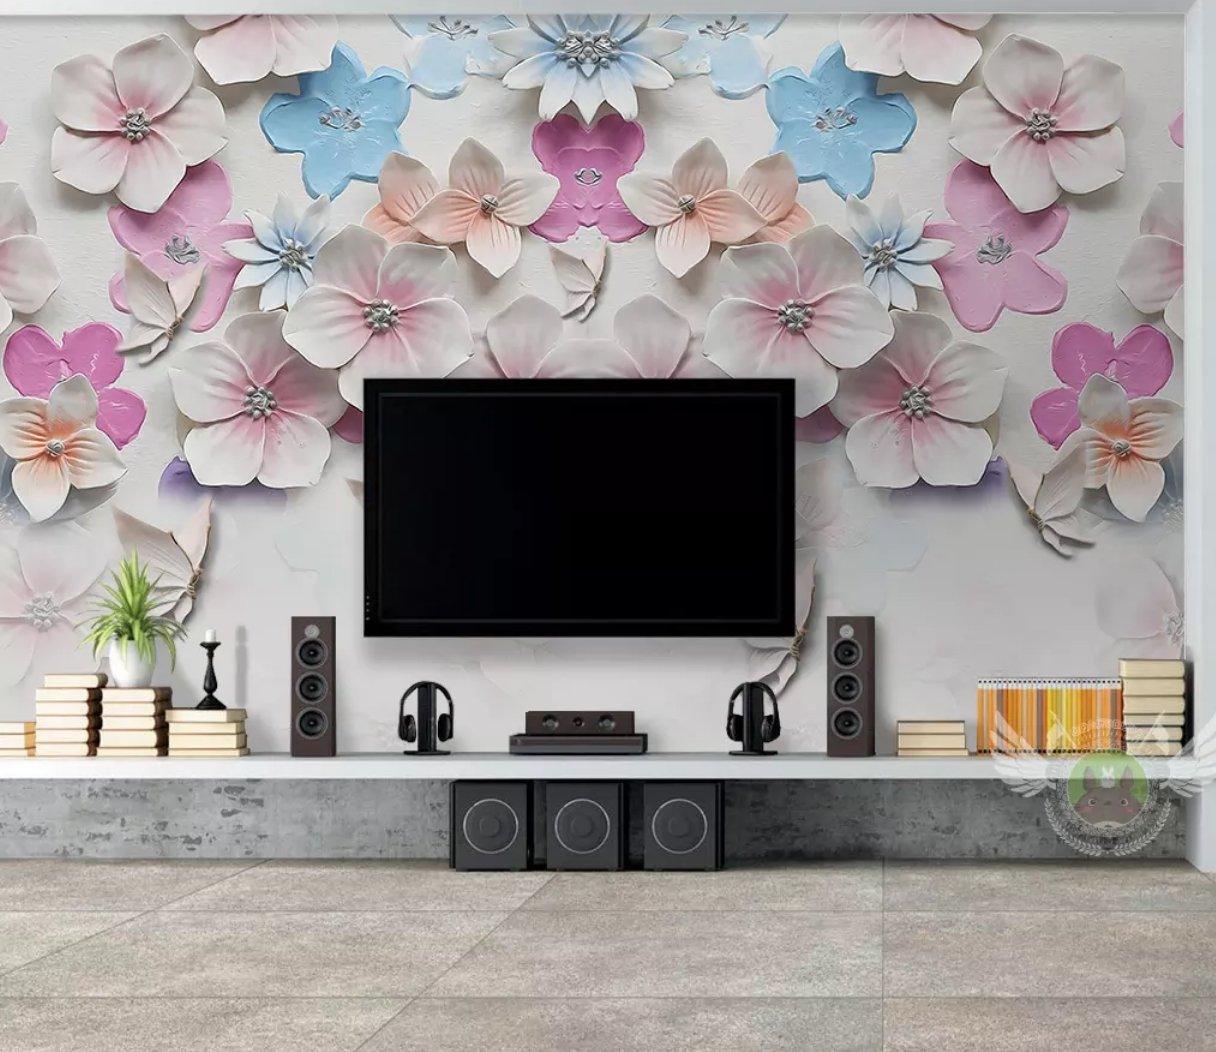 3D Ceramic Colorful Partysu Floral Wall Mural Removable 133- Jess Art Decoration